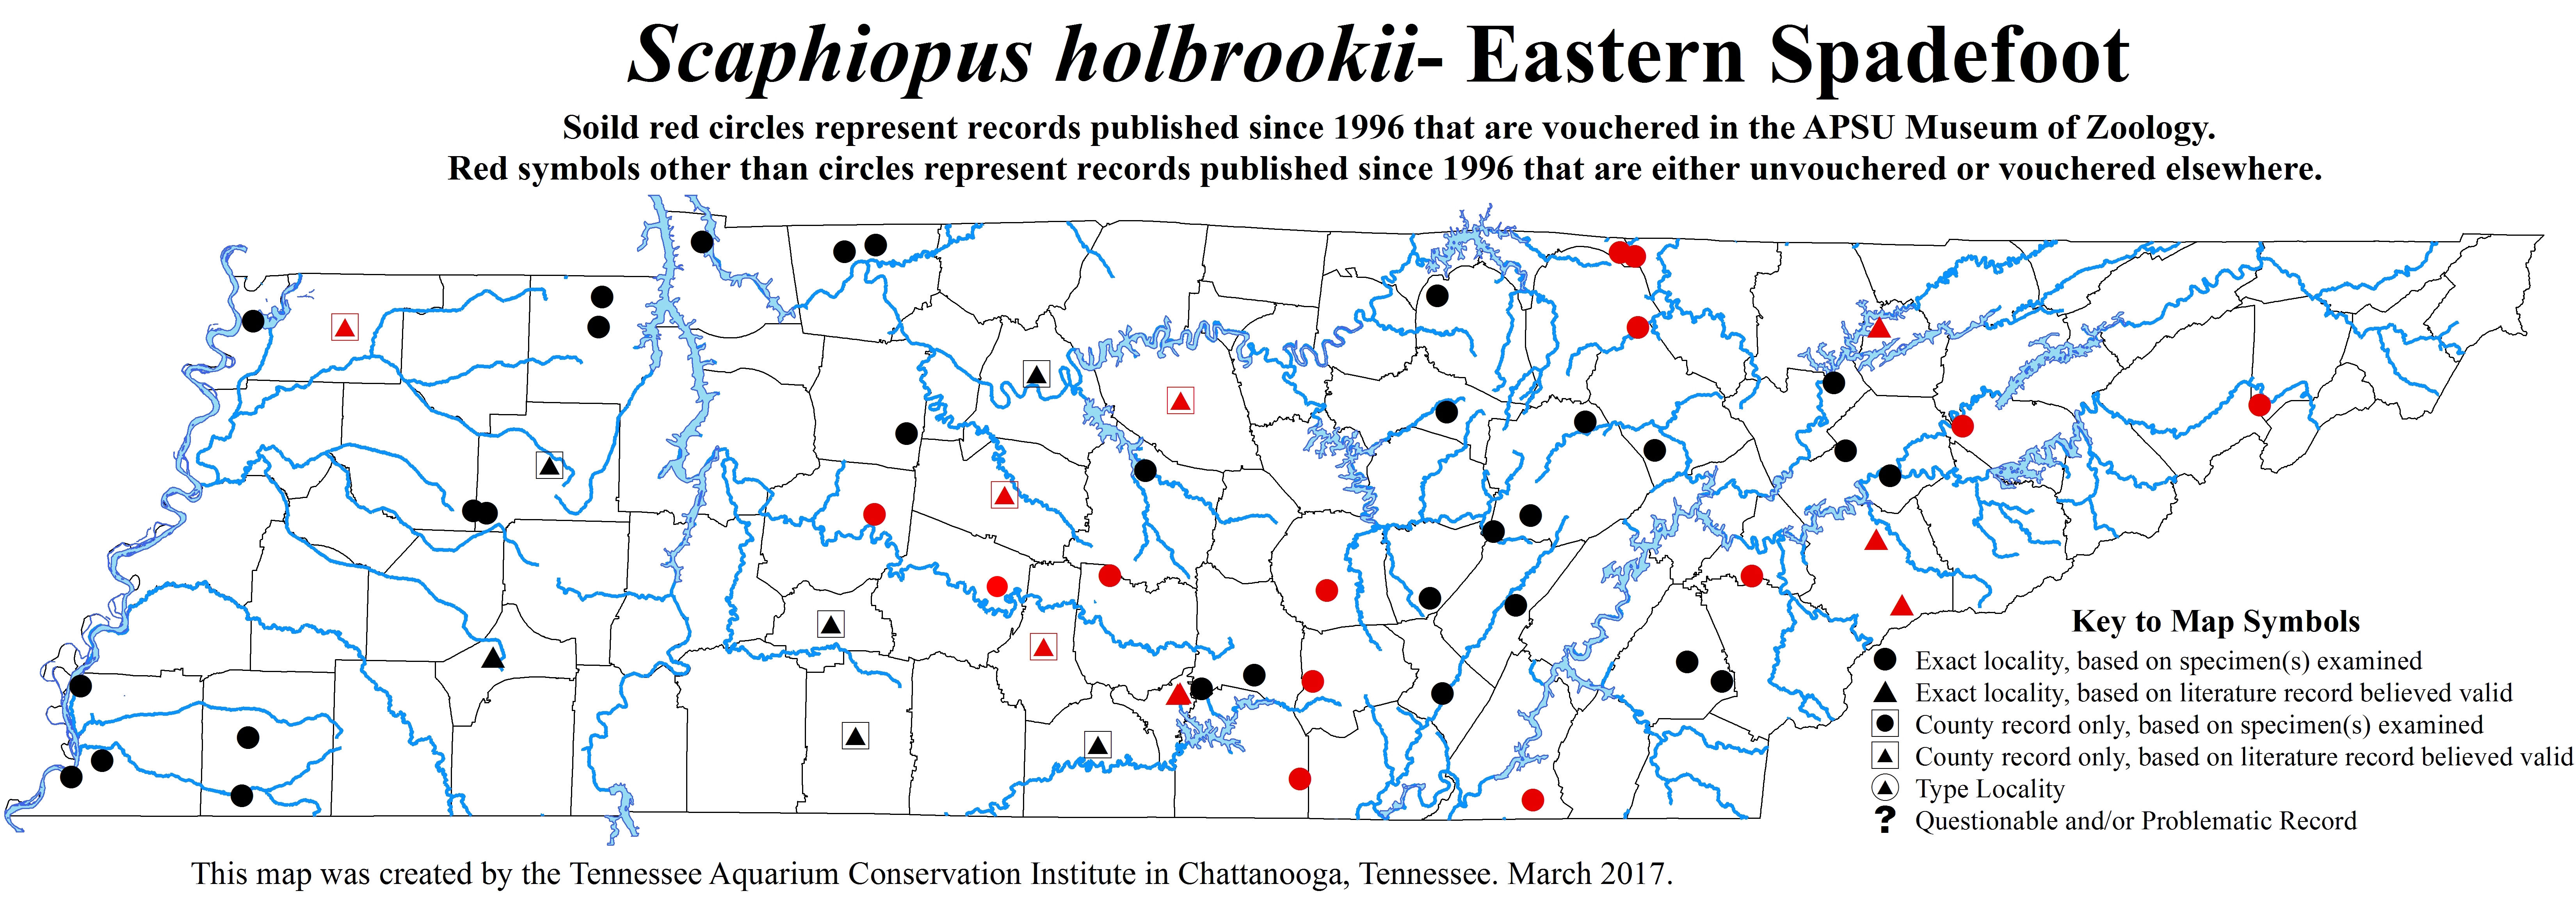 New Distribution Map - Scaphiopus holbrookii (Harlan) - Eastern Spadefoot